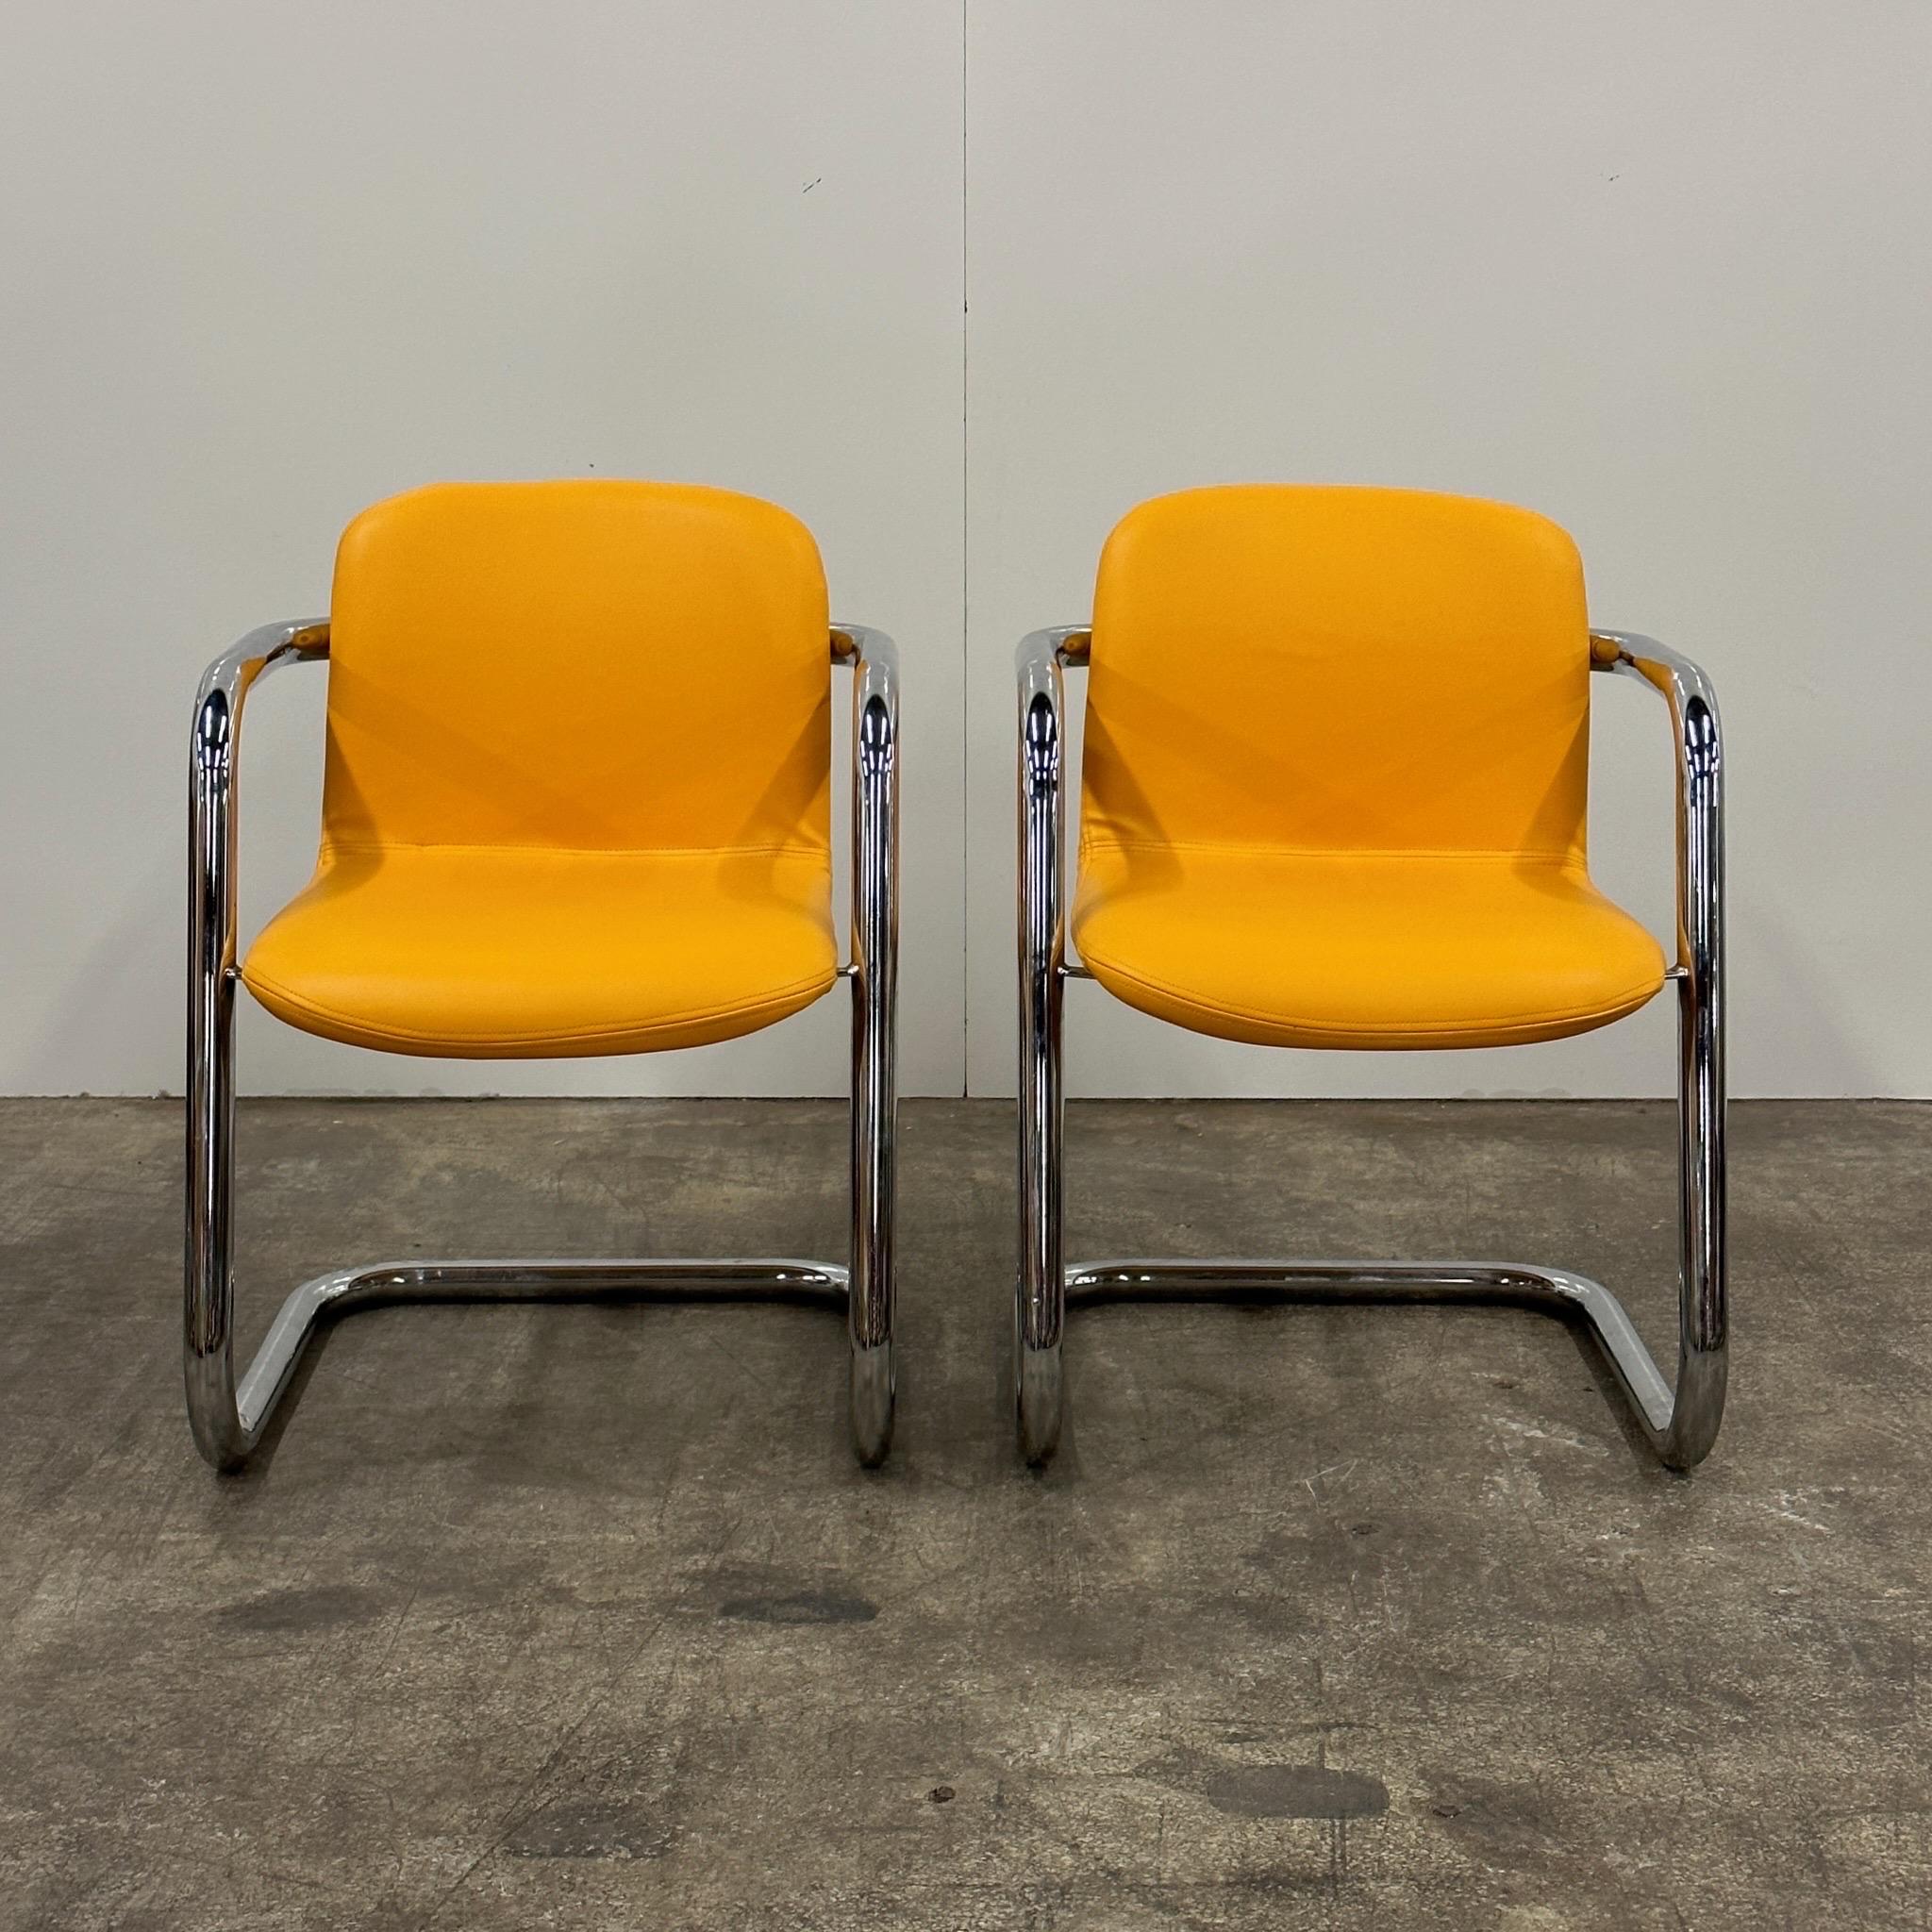 Made by Kinetics in Canada. Reupholstered in yellow marine vinyl. Chrome frame. Signed

Price is for the set. Contact us if you'd like to purchase a single item.